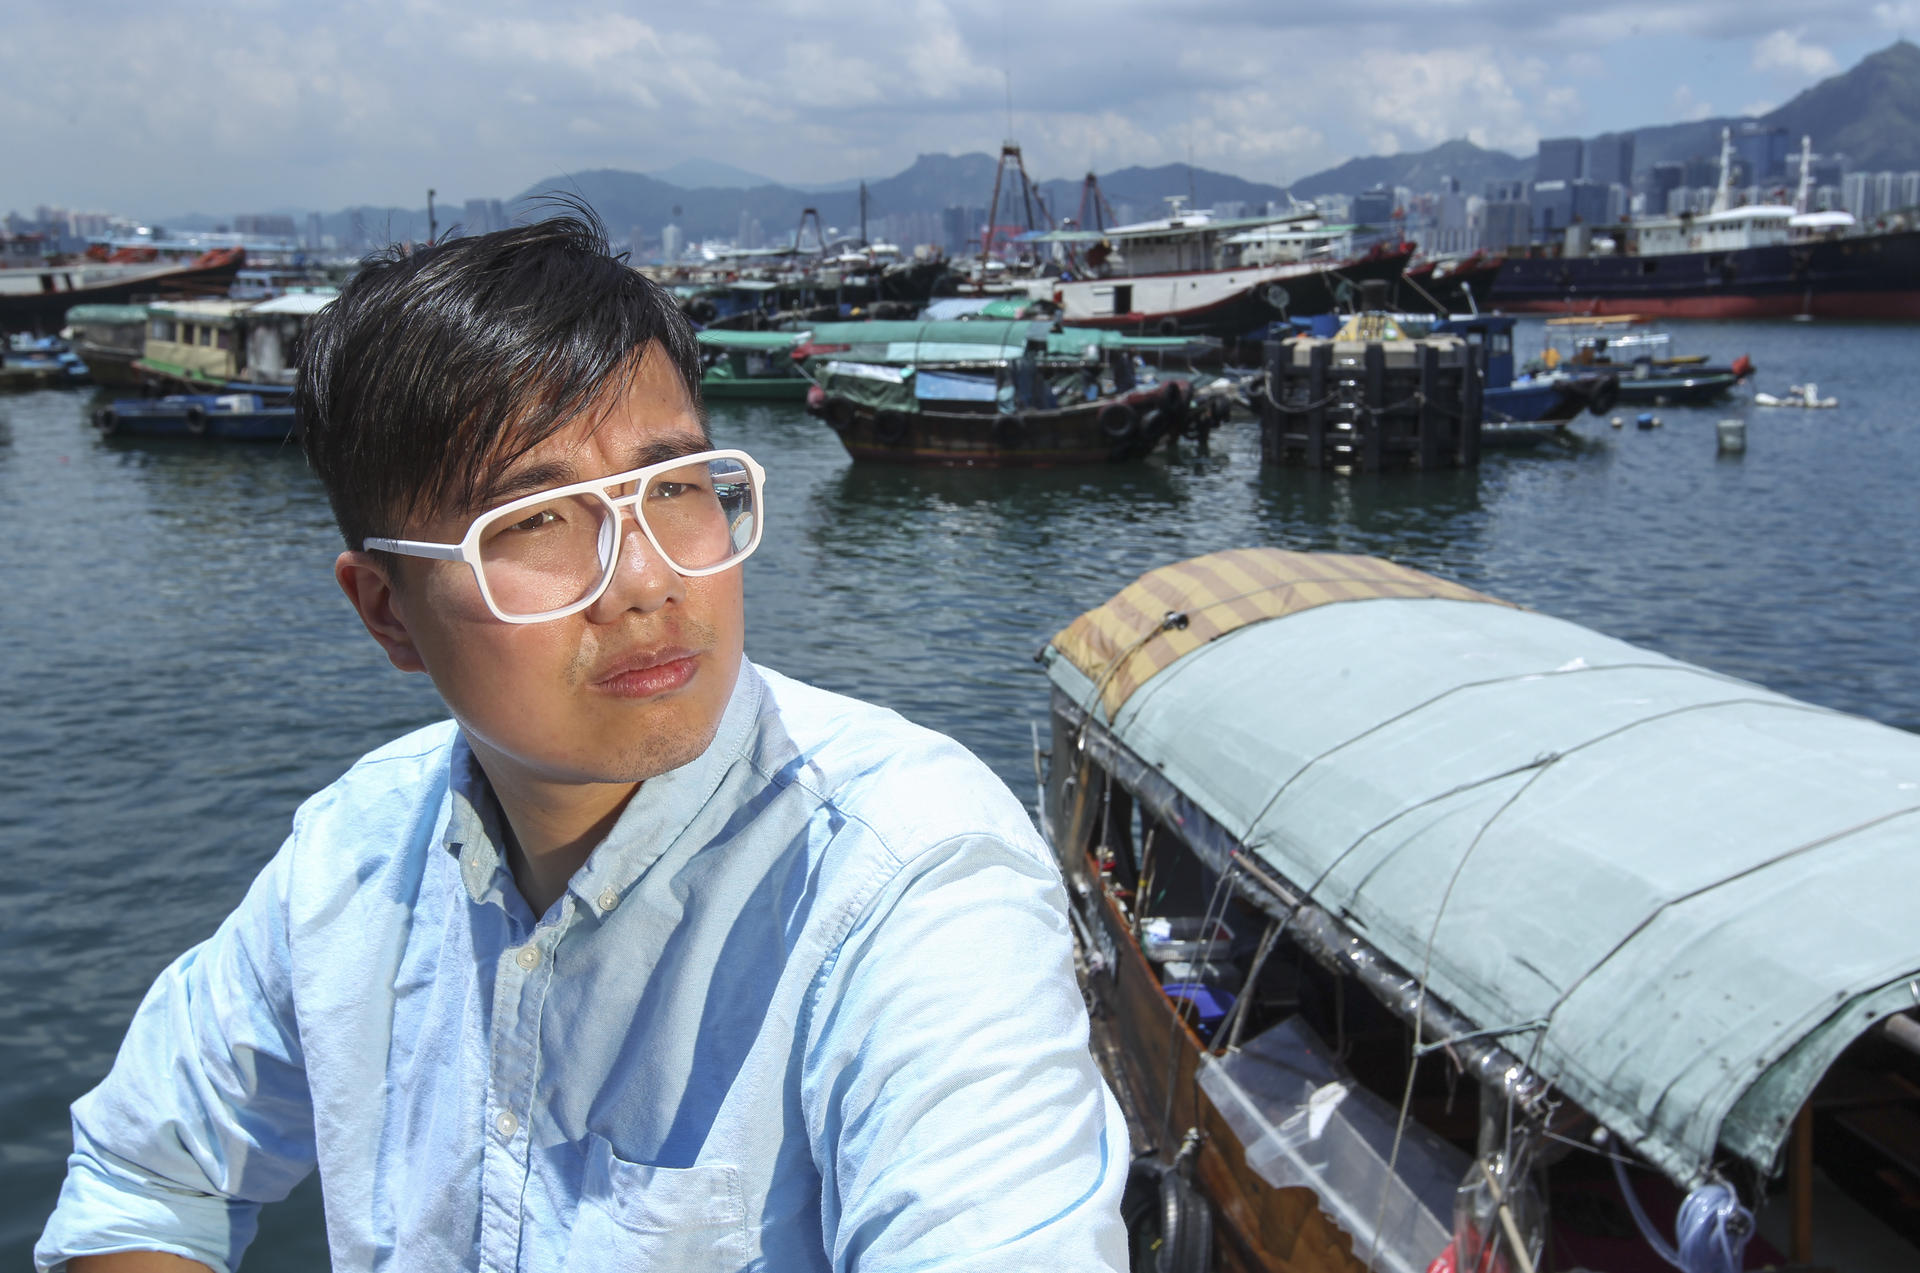 Isaac Wong spent his early years on a houseboat in Shau Kei Wan. He shares his thoughts on local culture and traditions in a fortnightly self-funded magazine. Photo: Nora Tam